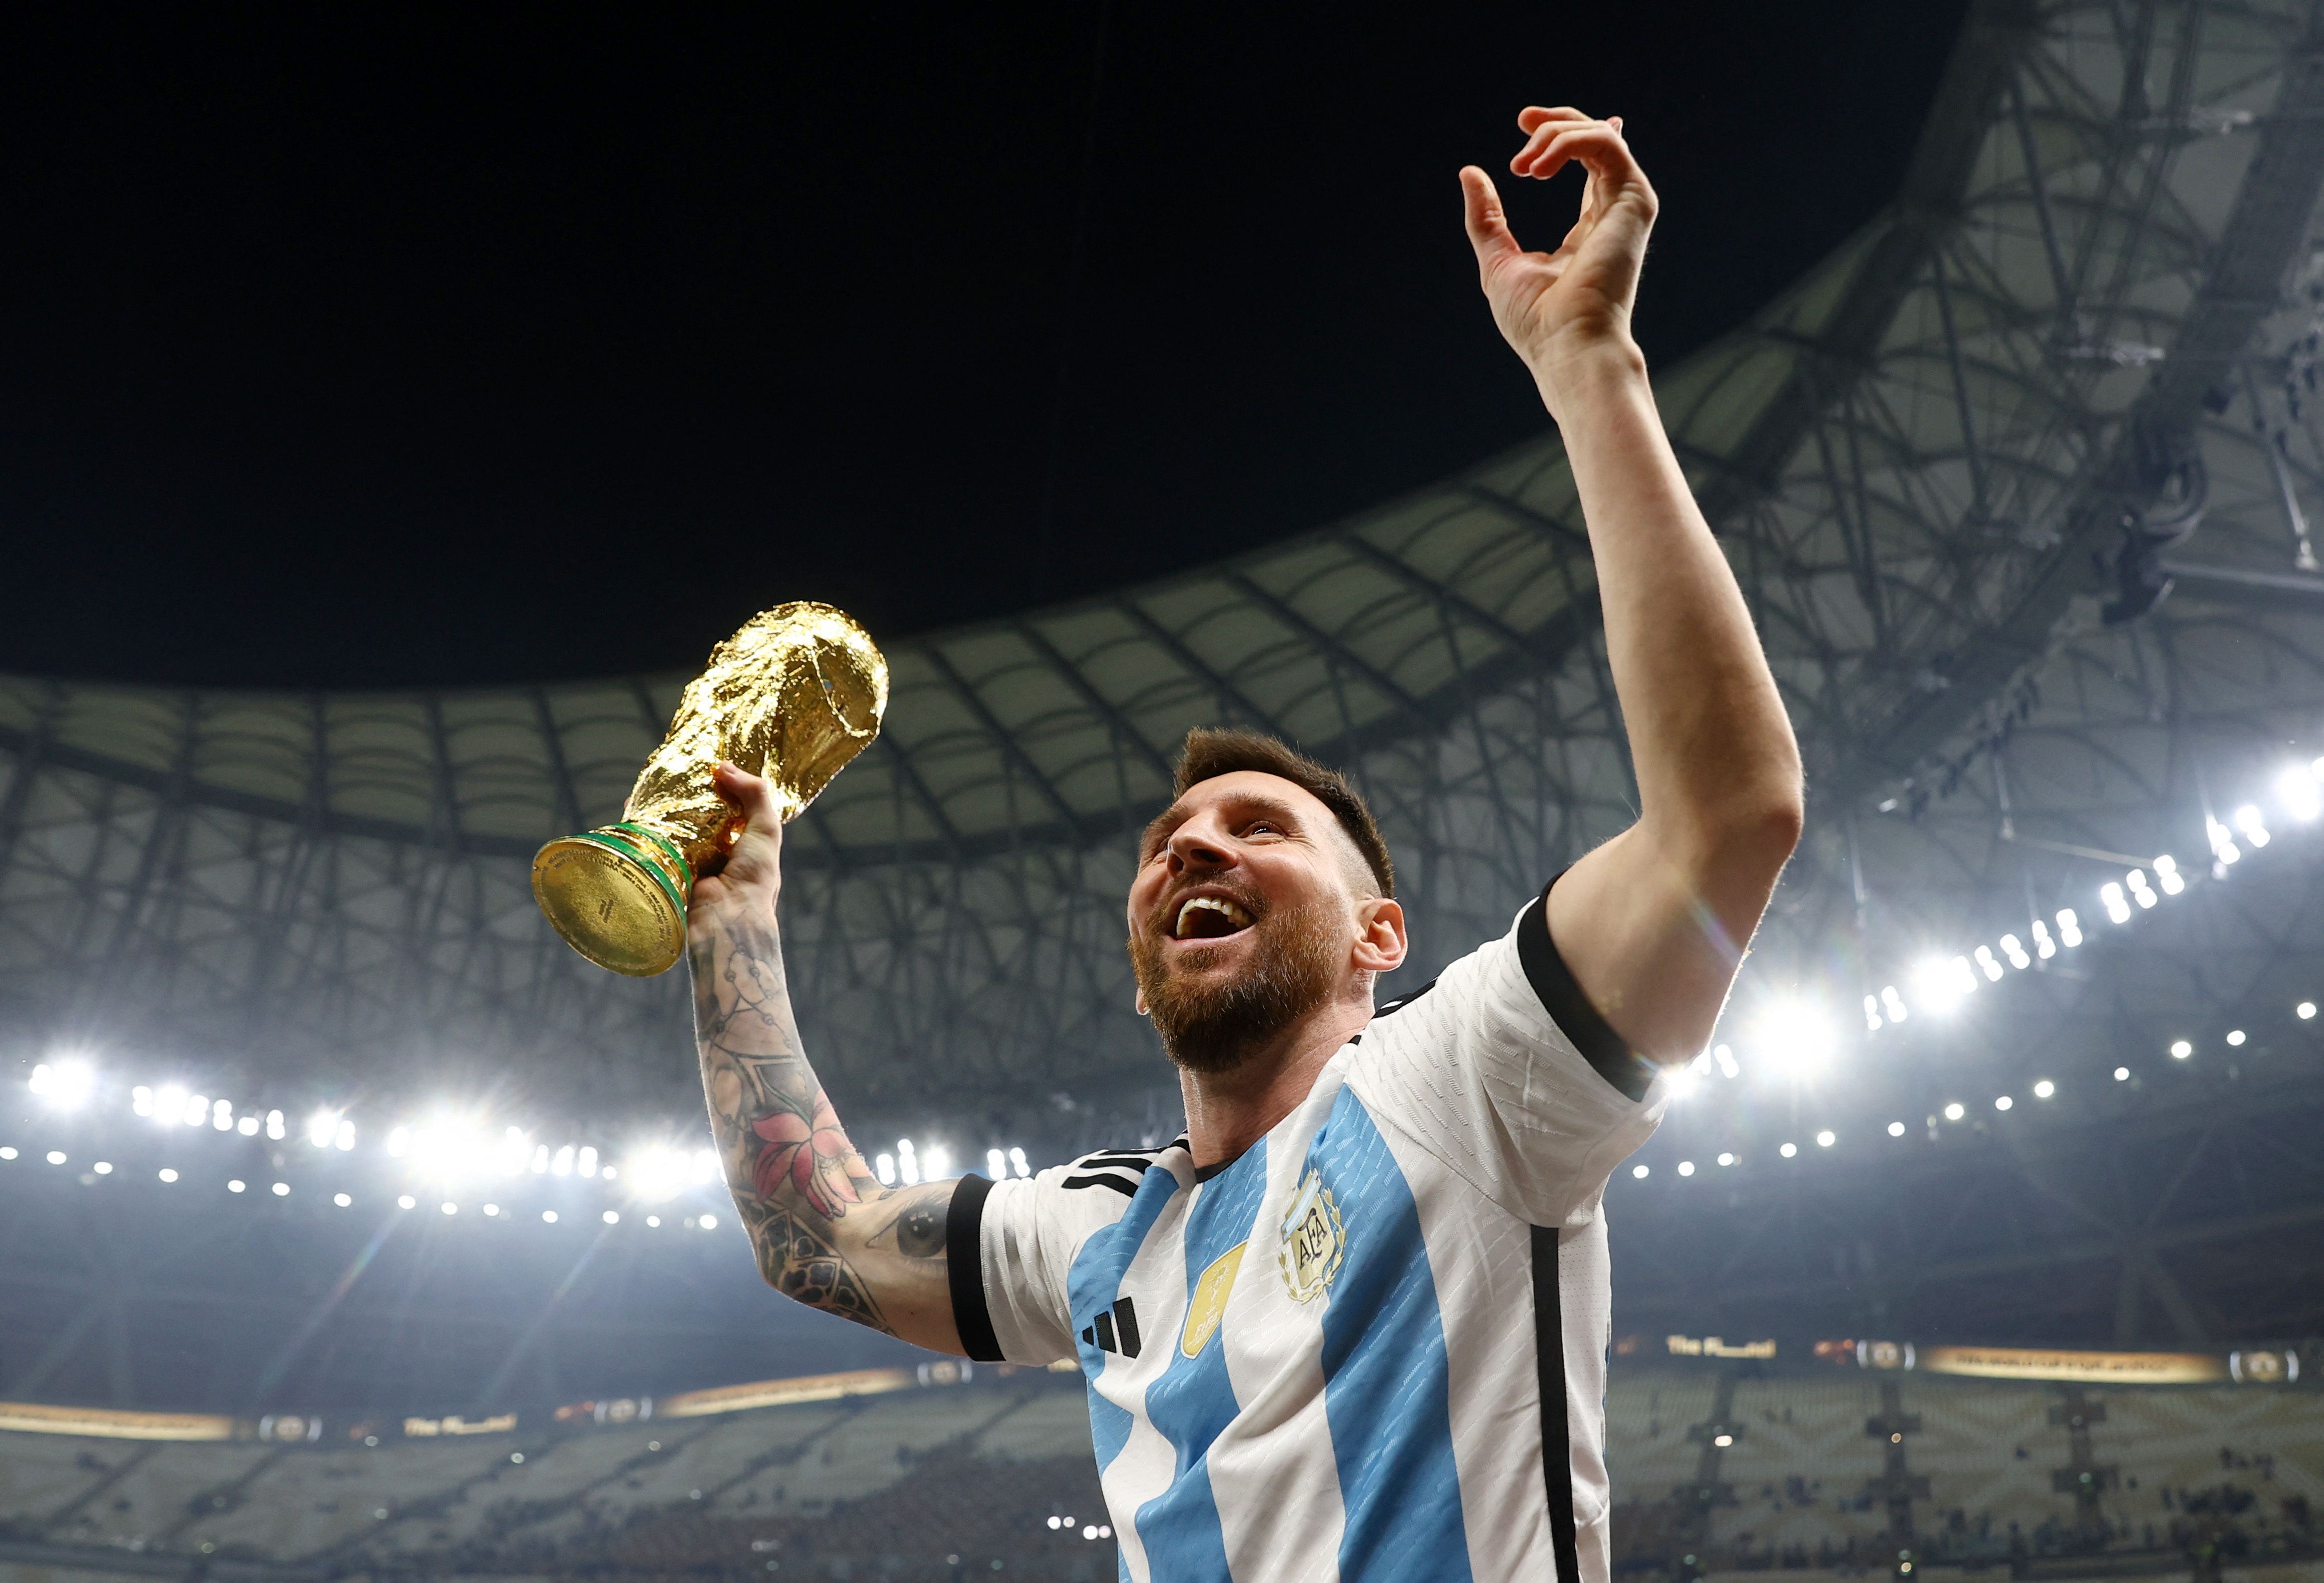 Messi: It's been a month, and I still can't believe that we are world champions